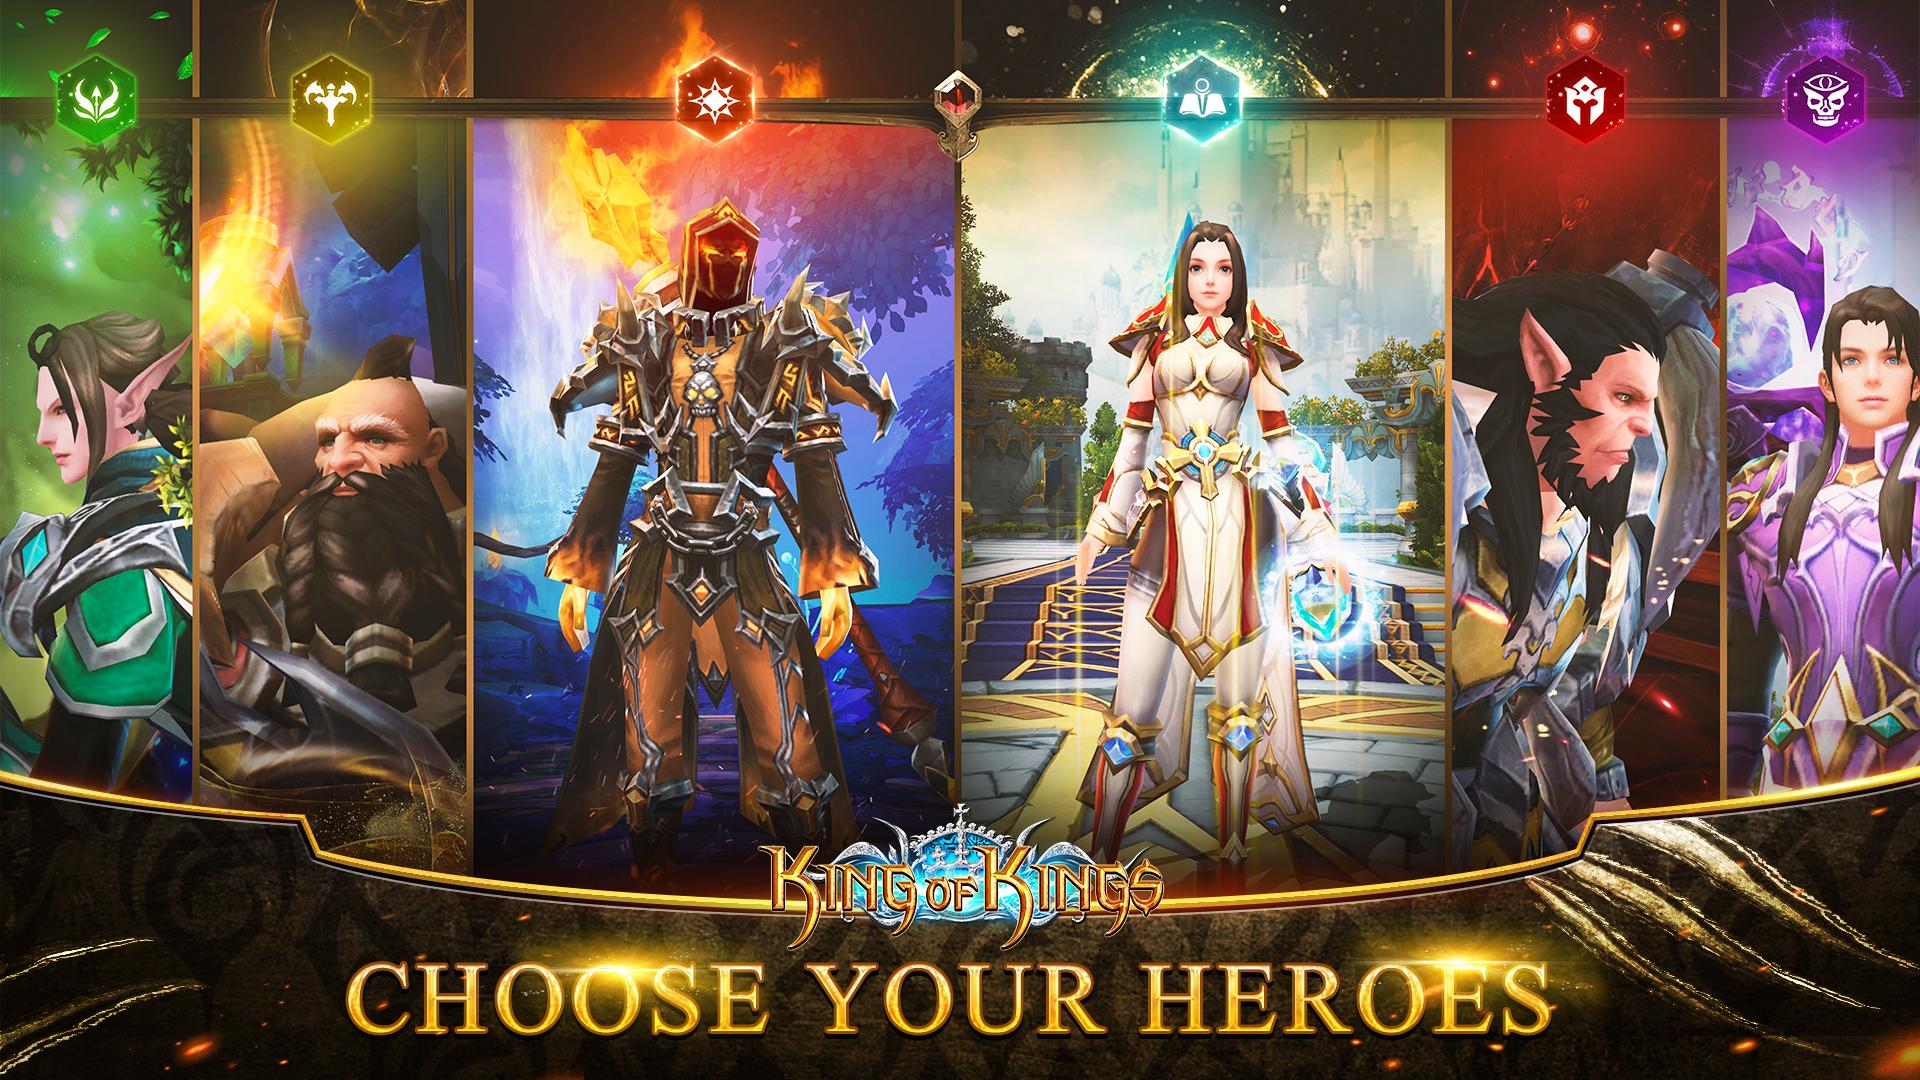 King of Kings for Android - APK Download - 